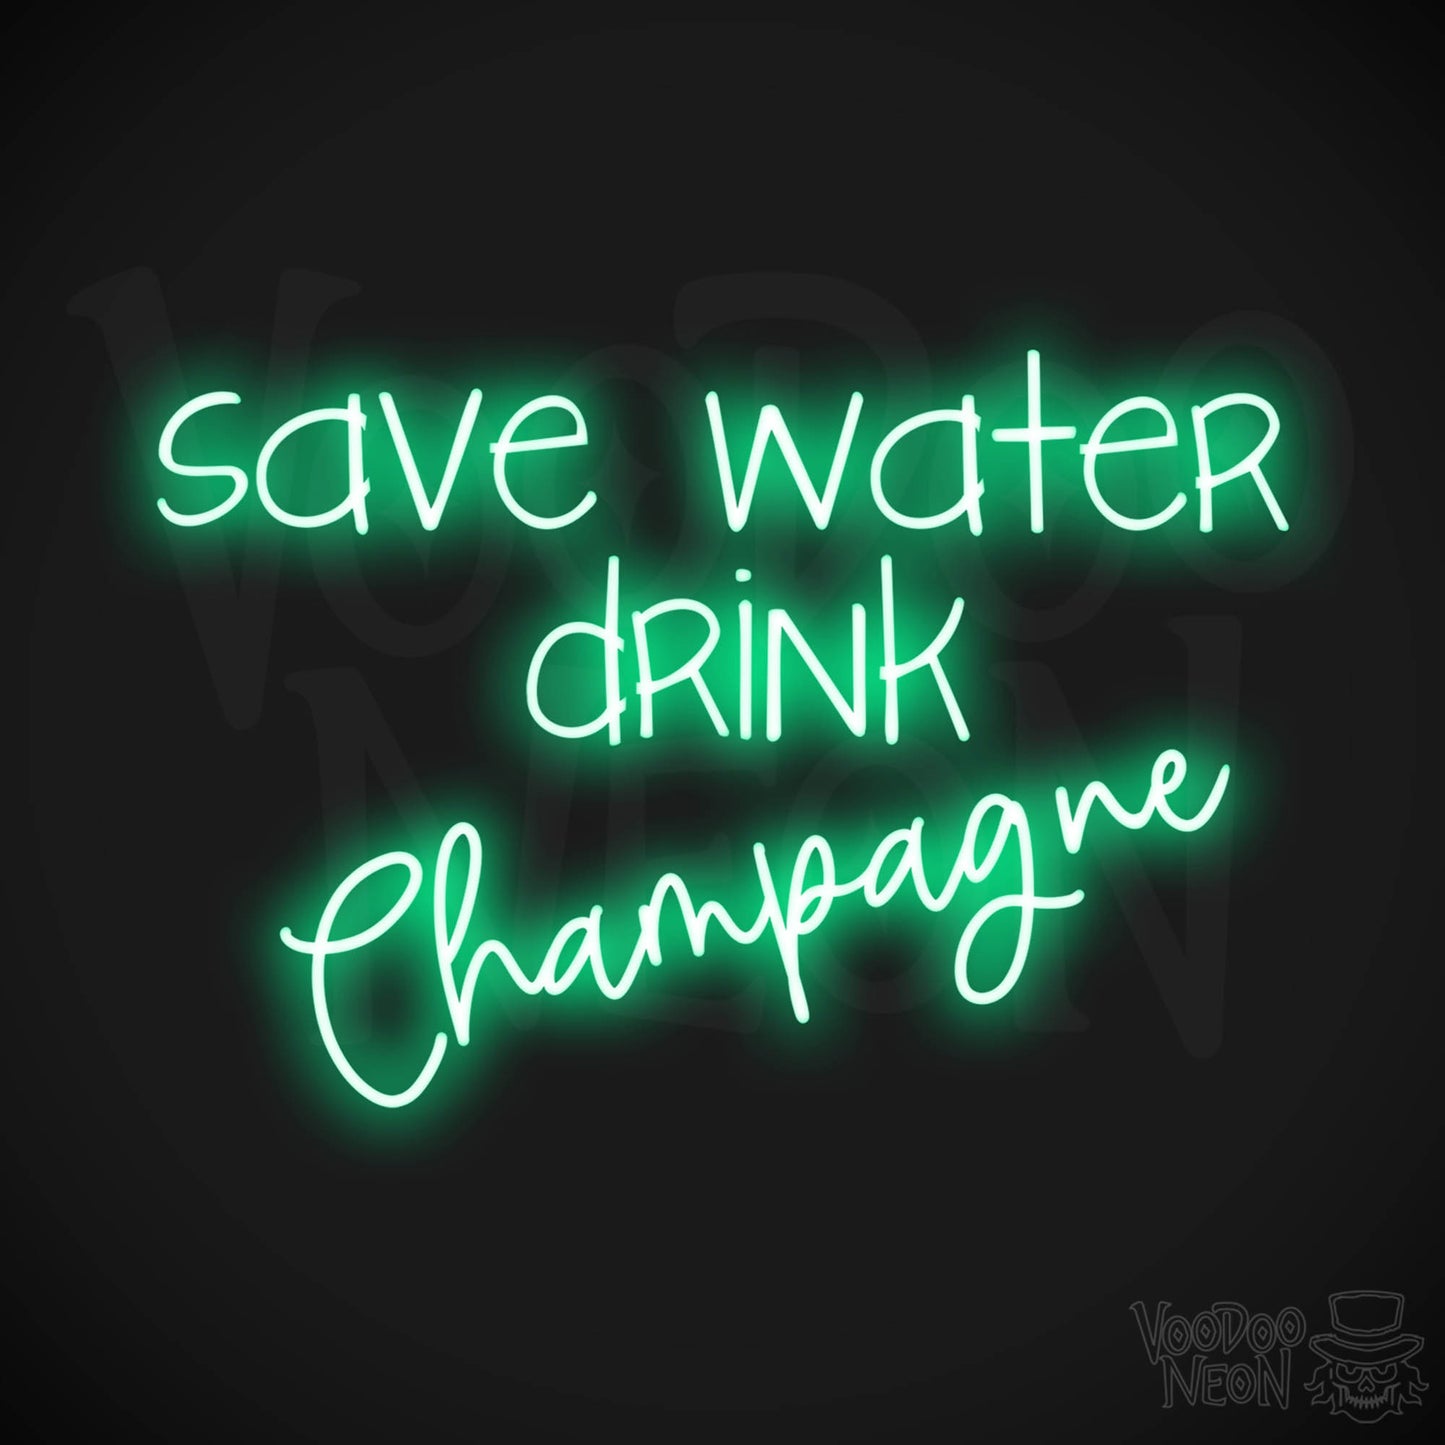 Save Water Drink Champagne LED Neon - Green